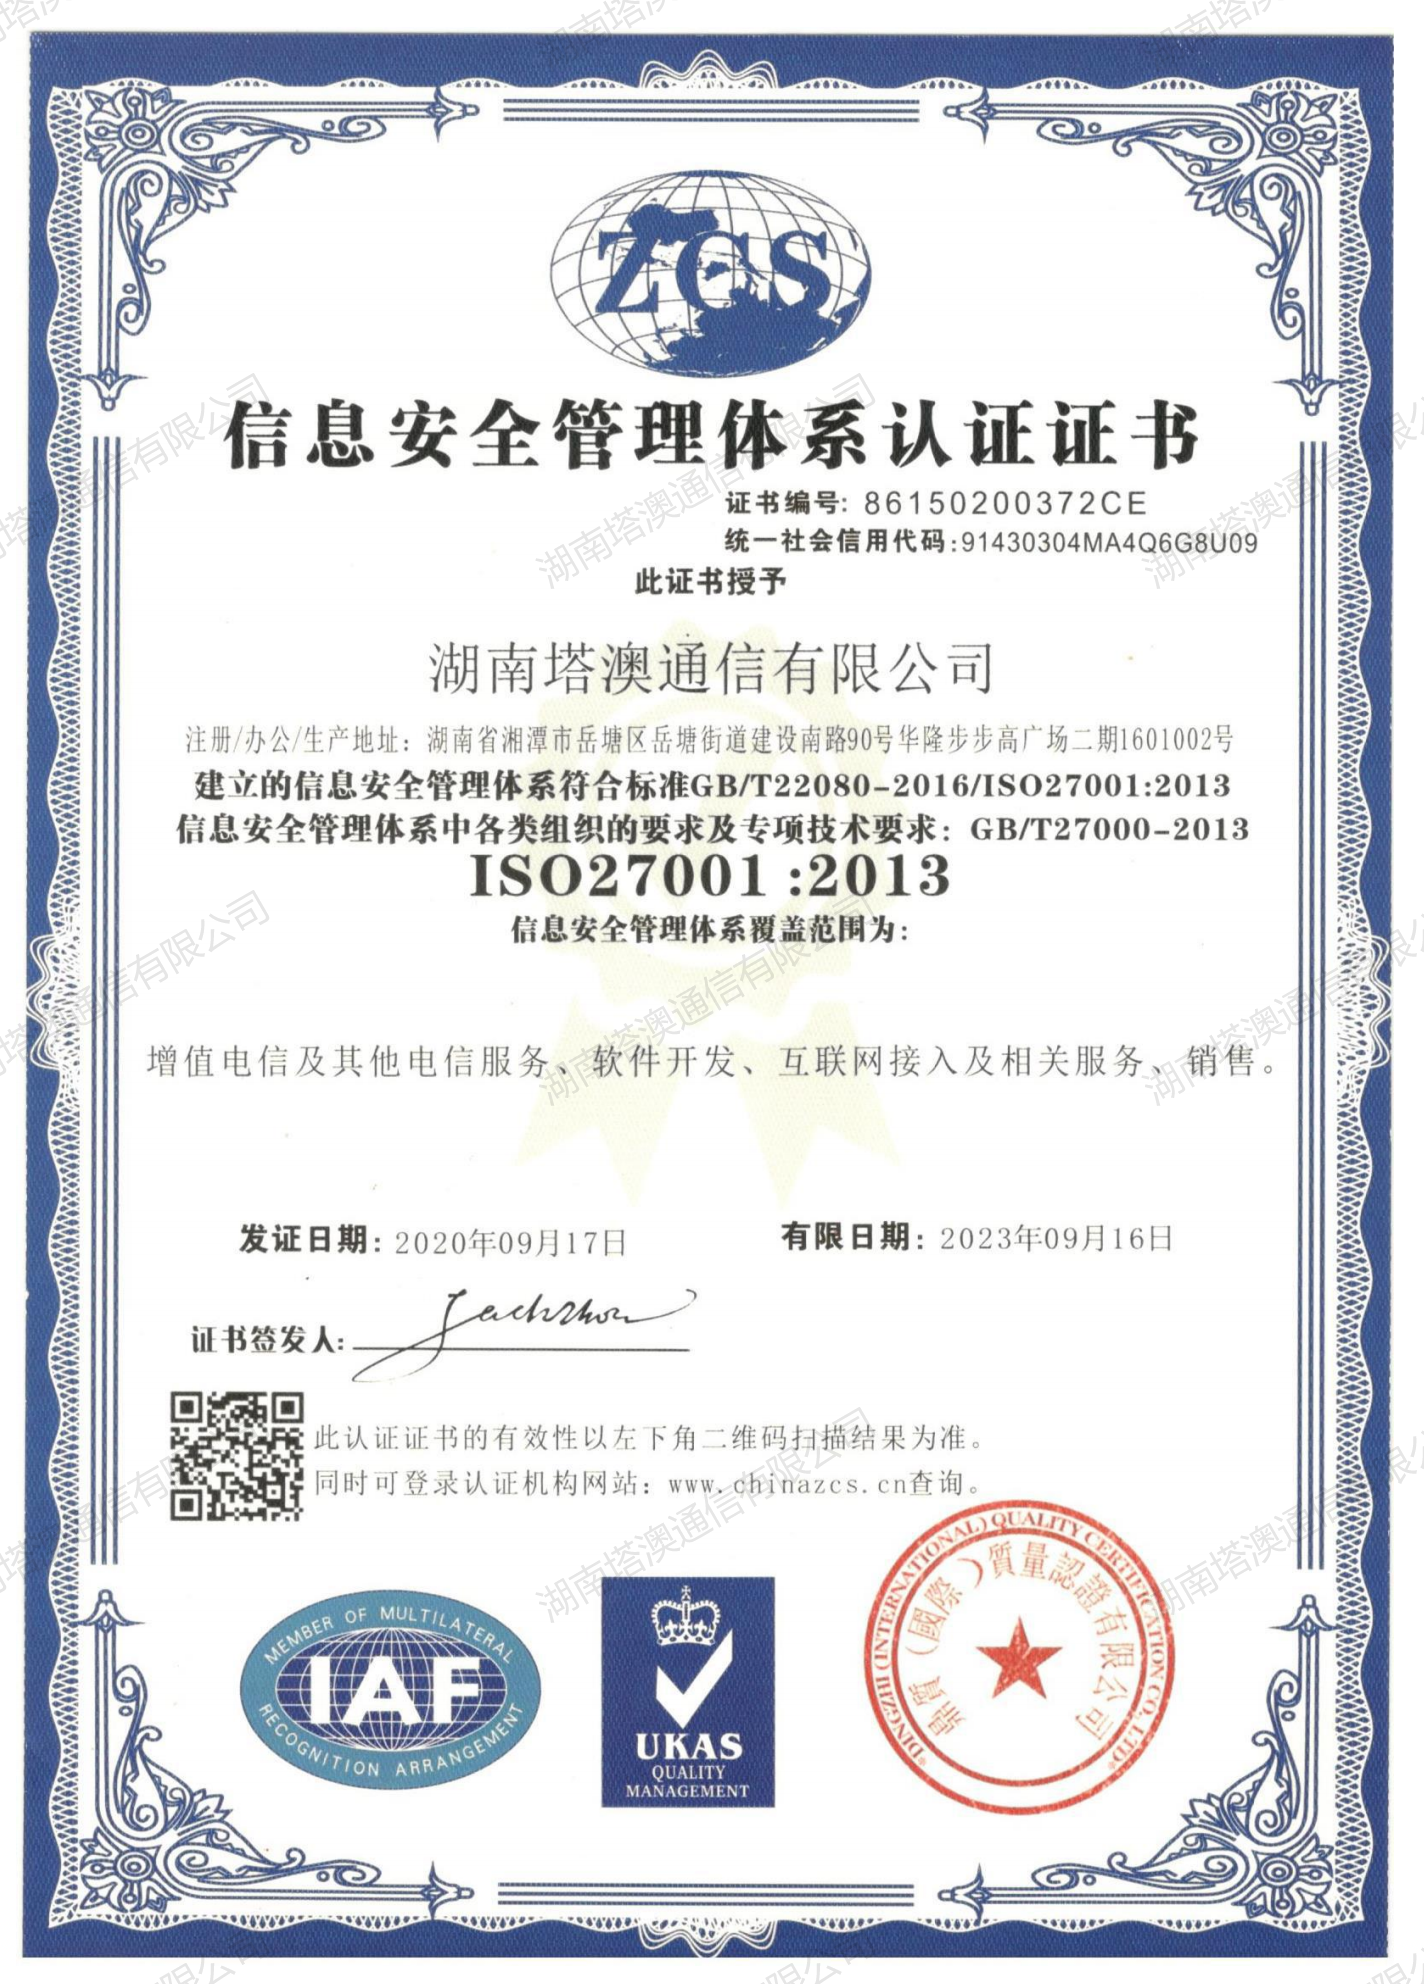 Information Security Management System certificate